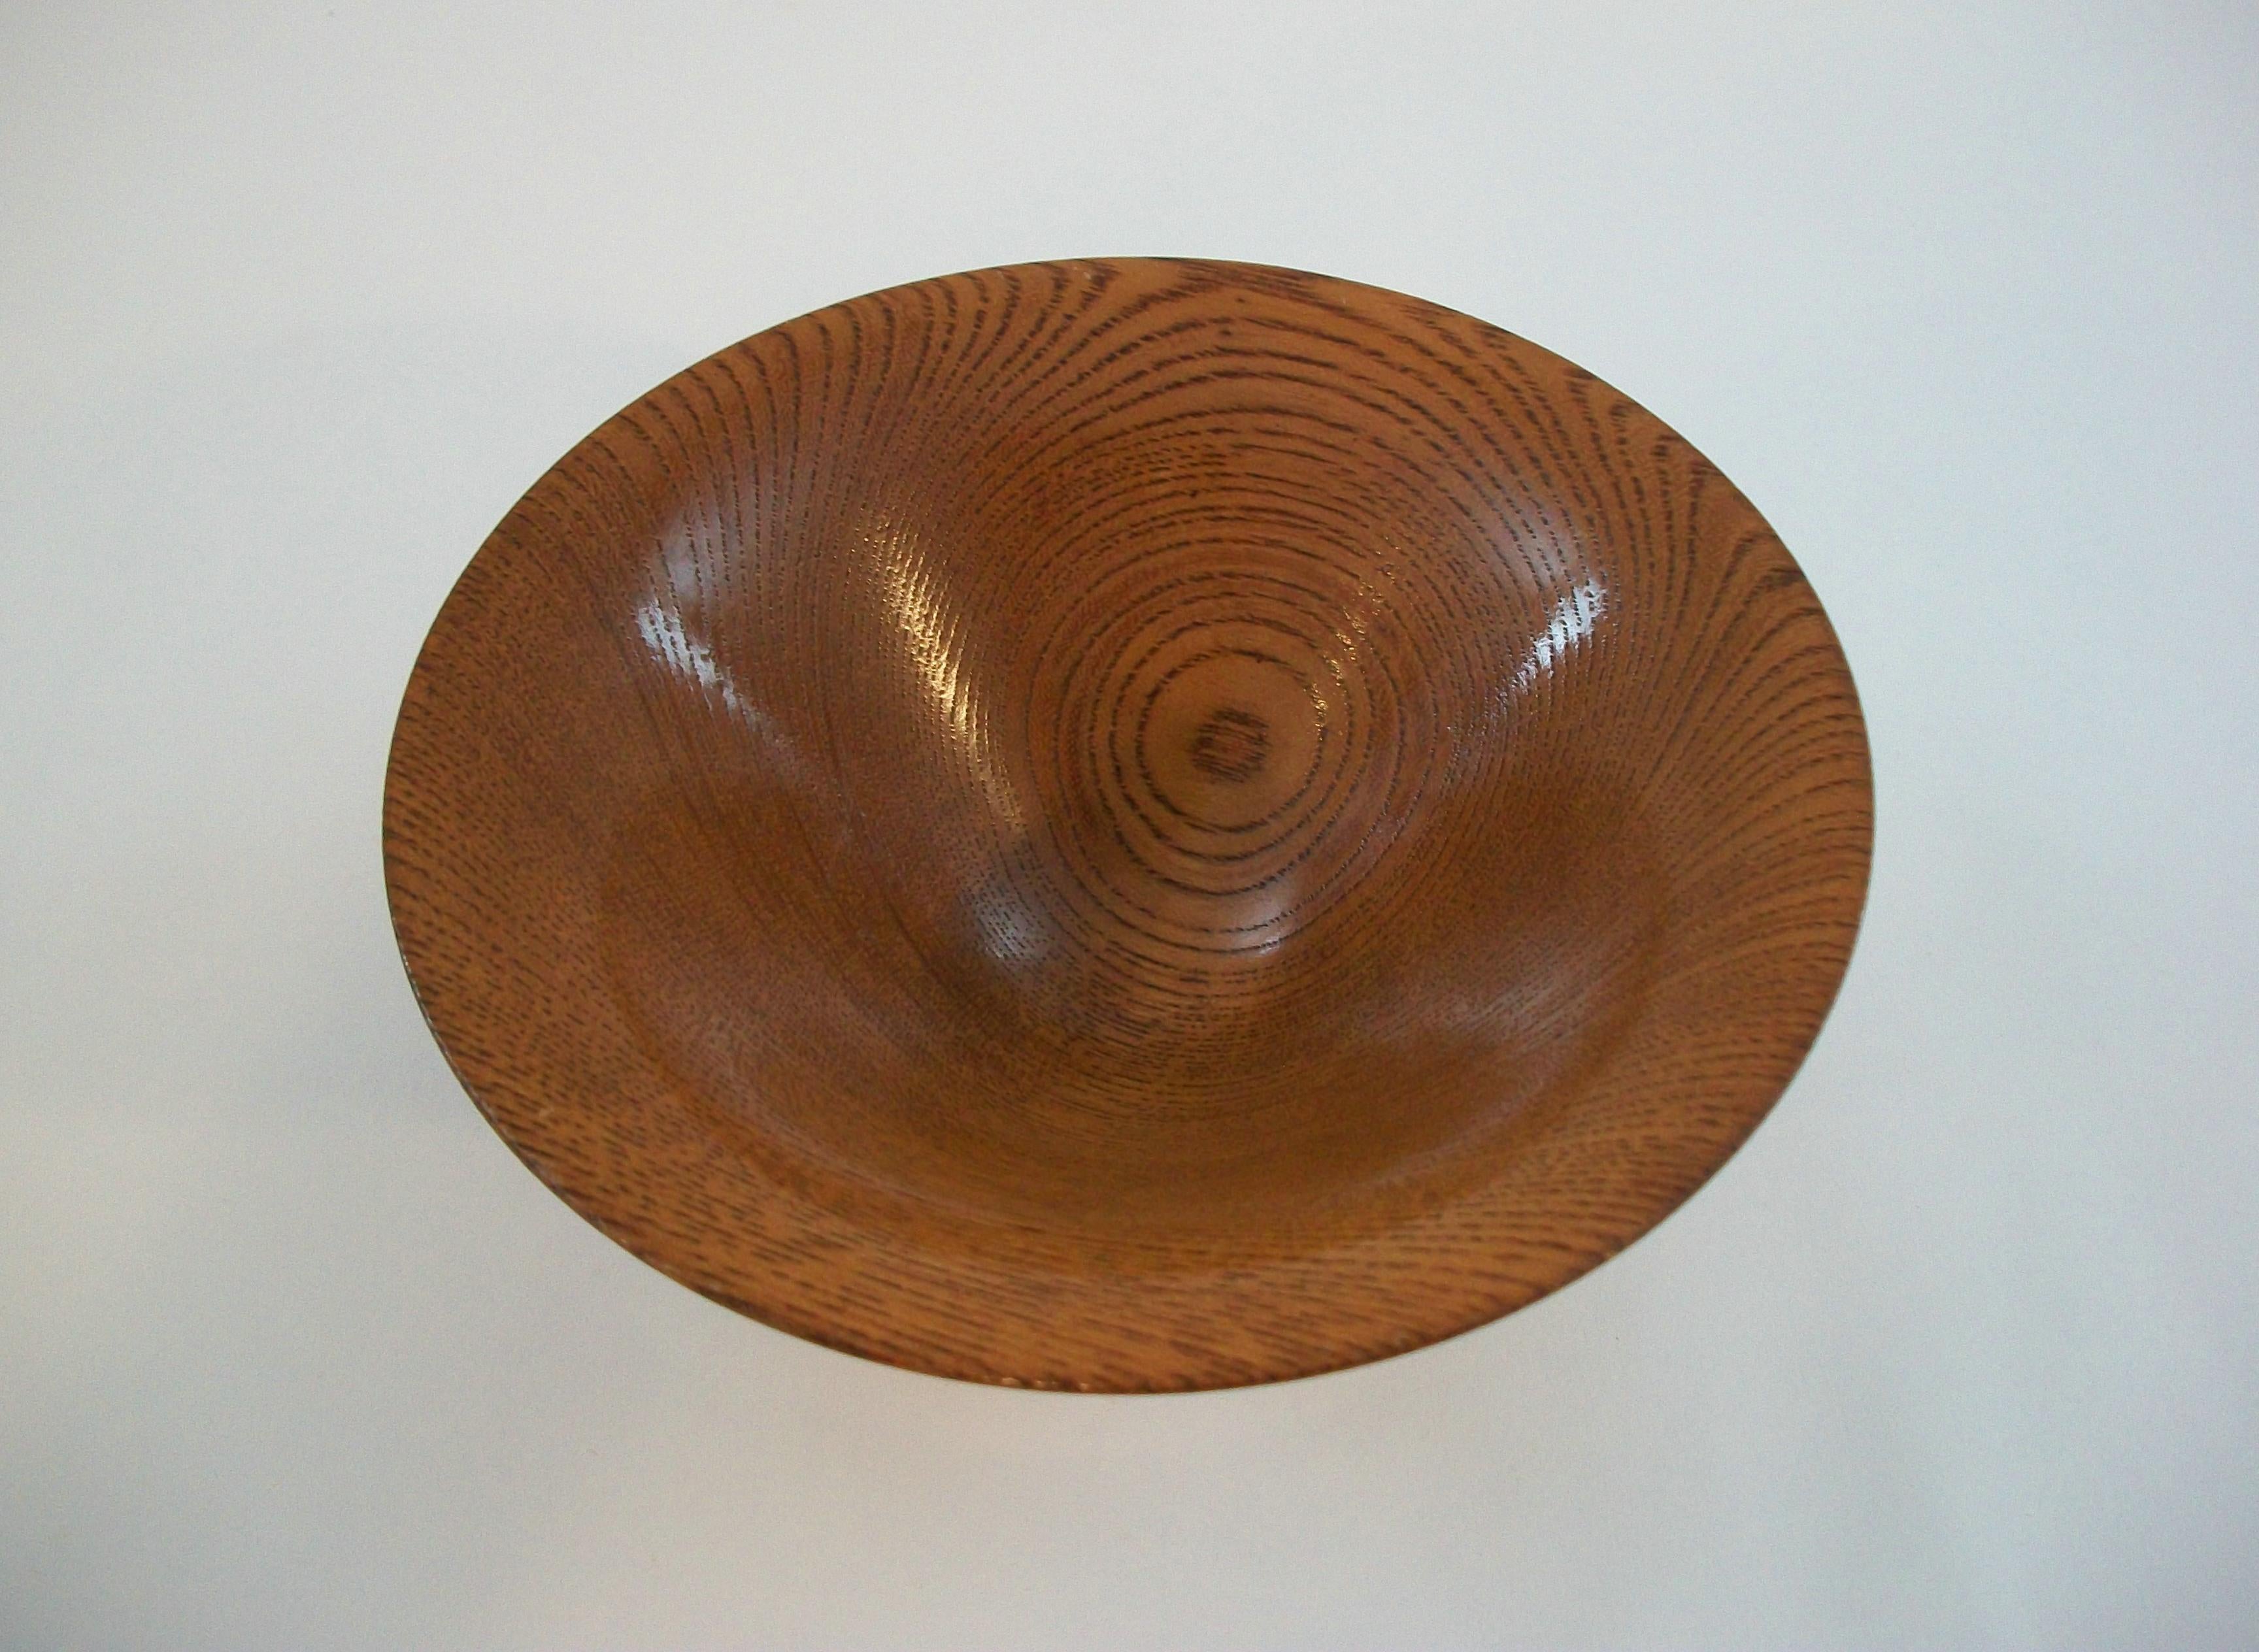 Hand-Crafted Mid Century Conical Teak Bowl - Small Size - Signed - Denmark - Circa 1960's For Sale